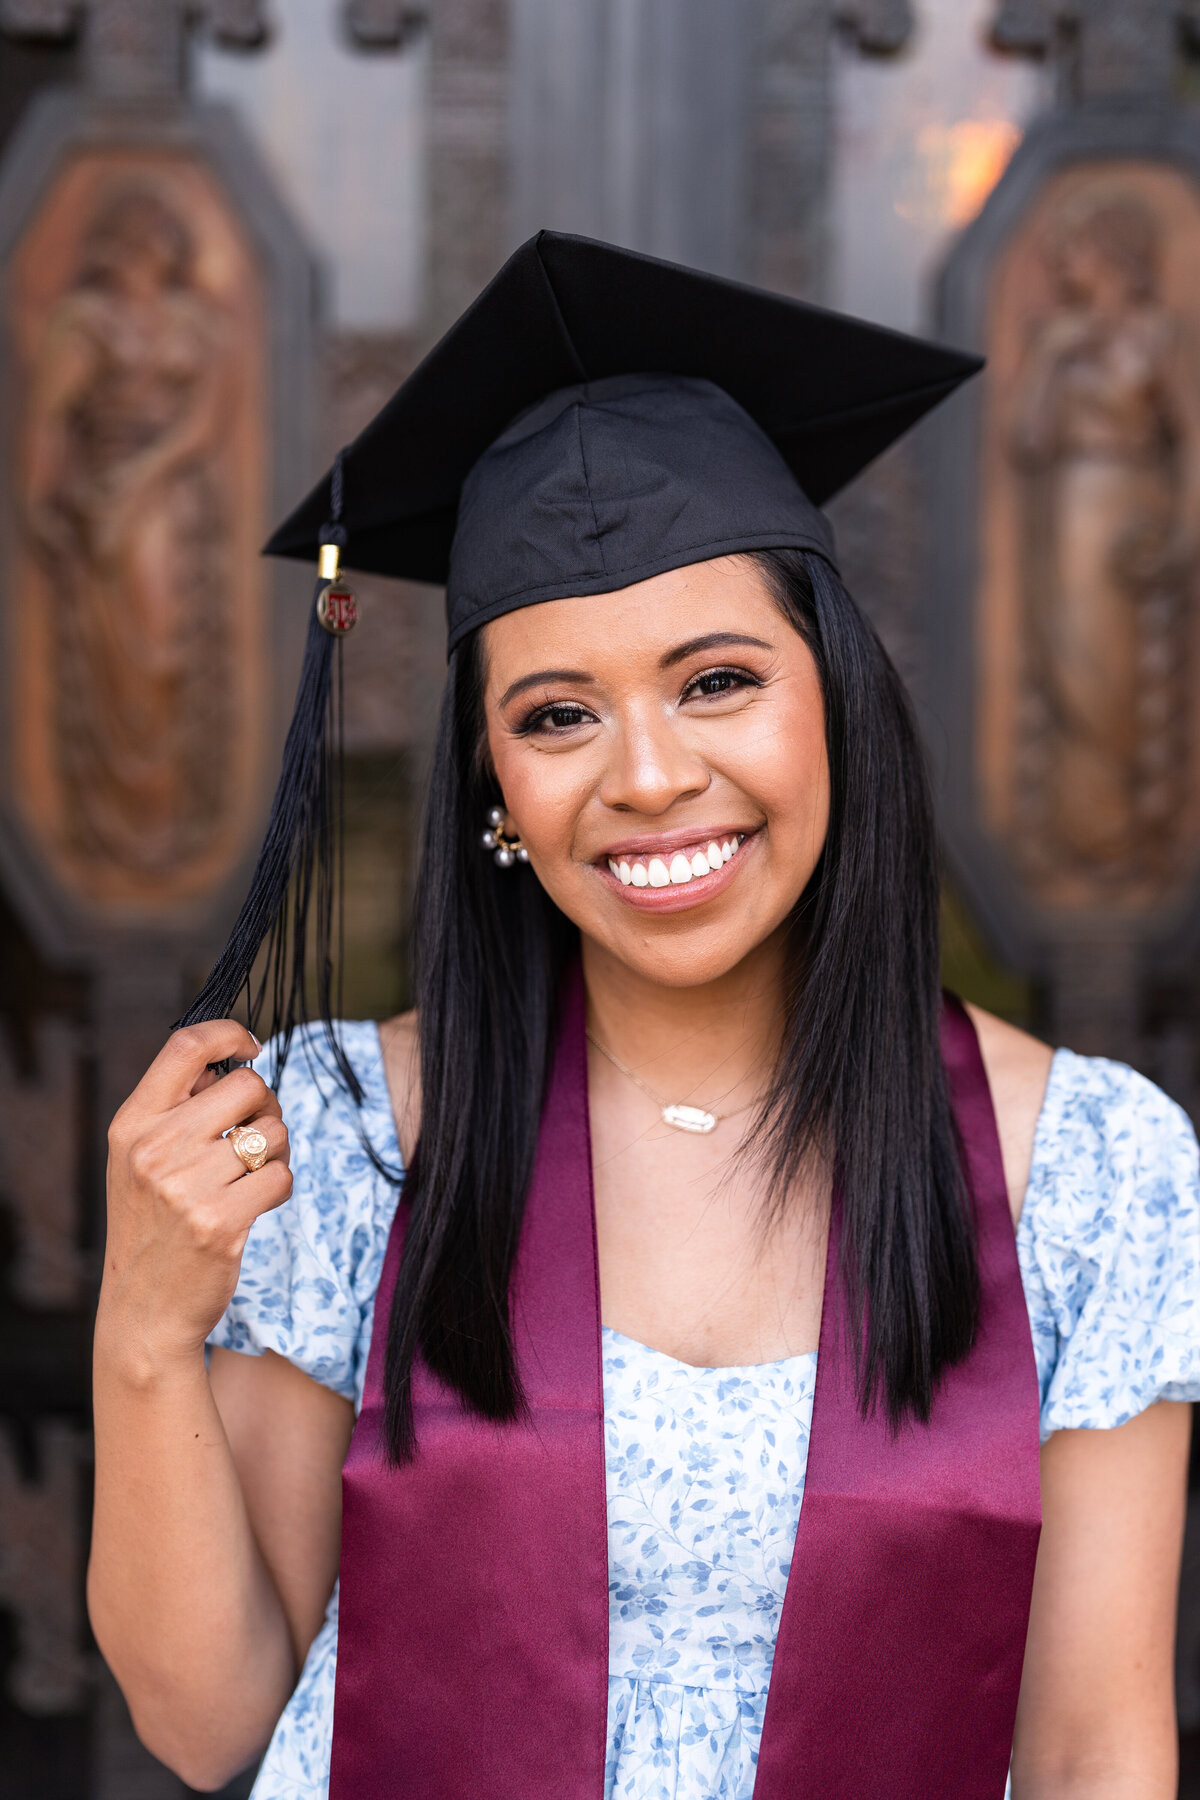 Texas A&M senior girl wearing cap and smiling while holding tassel and wearing maroon stole and blue dress in front of Administration building front doors